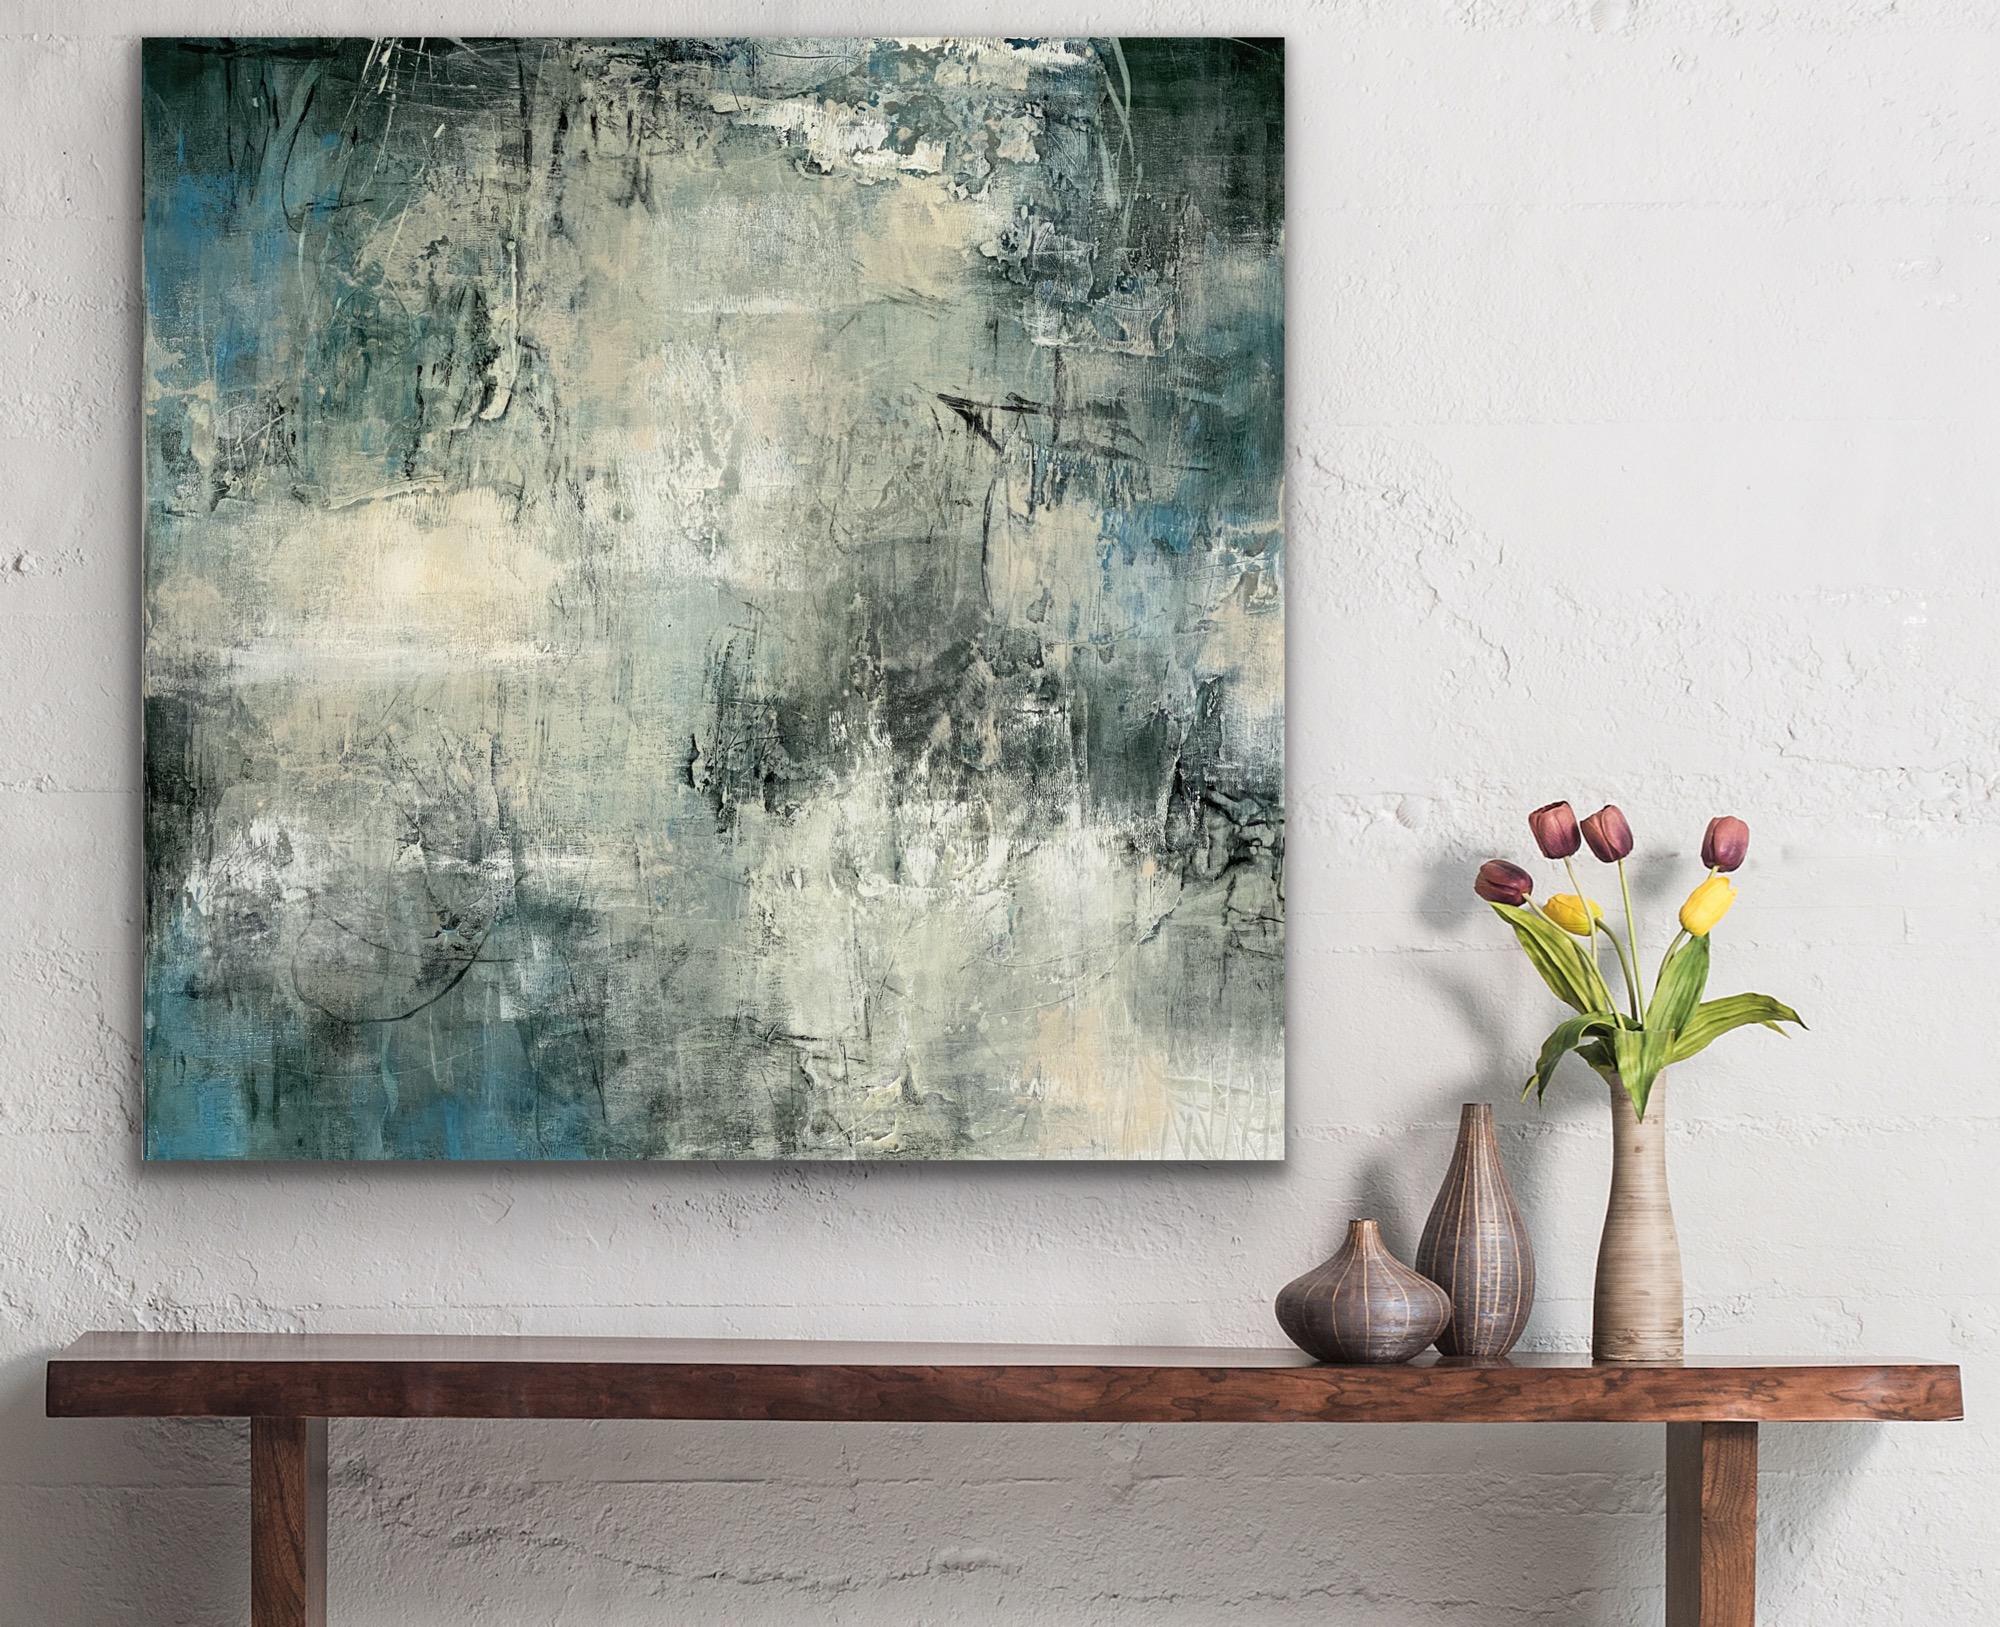 There is a feeling of depth almost like underwater with white splashes above.  The texture gives a feeling of timeless and duration.  This painting has a lush quality with its texture and many layers of paint in varying degrees of shading.  There is